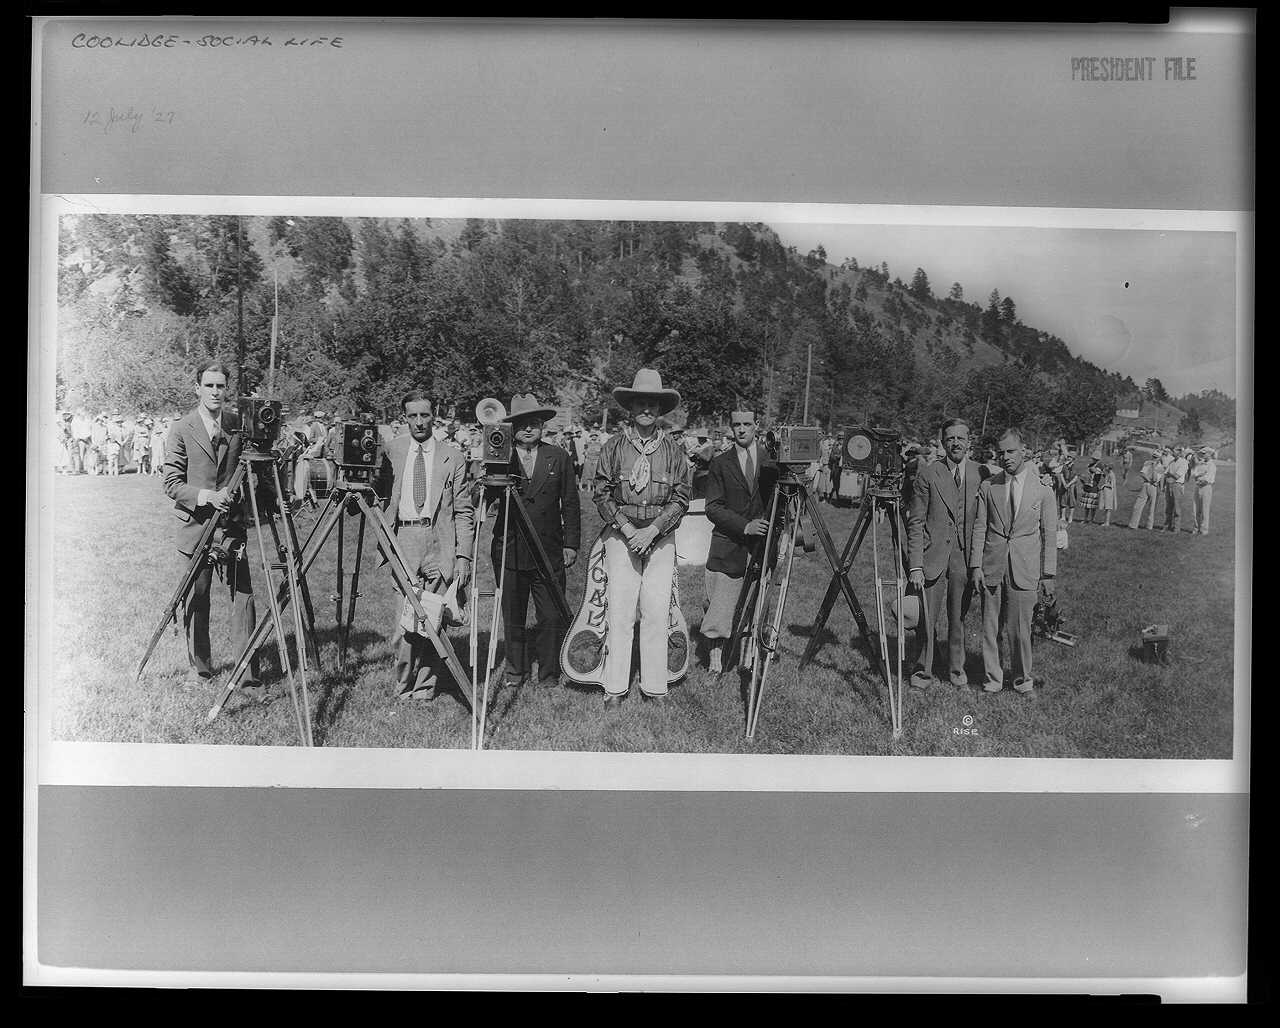 President Coolidge posing in his new gear with photographers, near the Game Lodge in Custer State Park, South Dakota. 